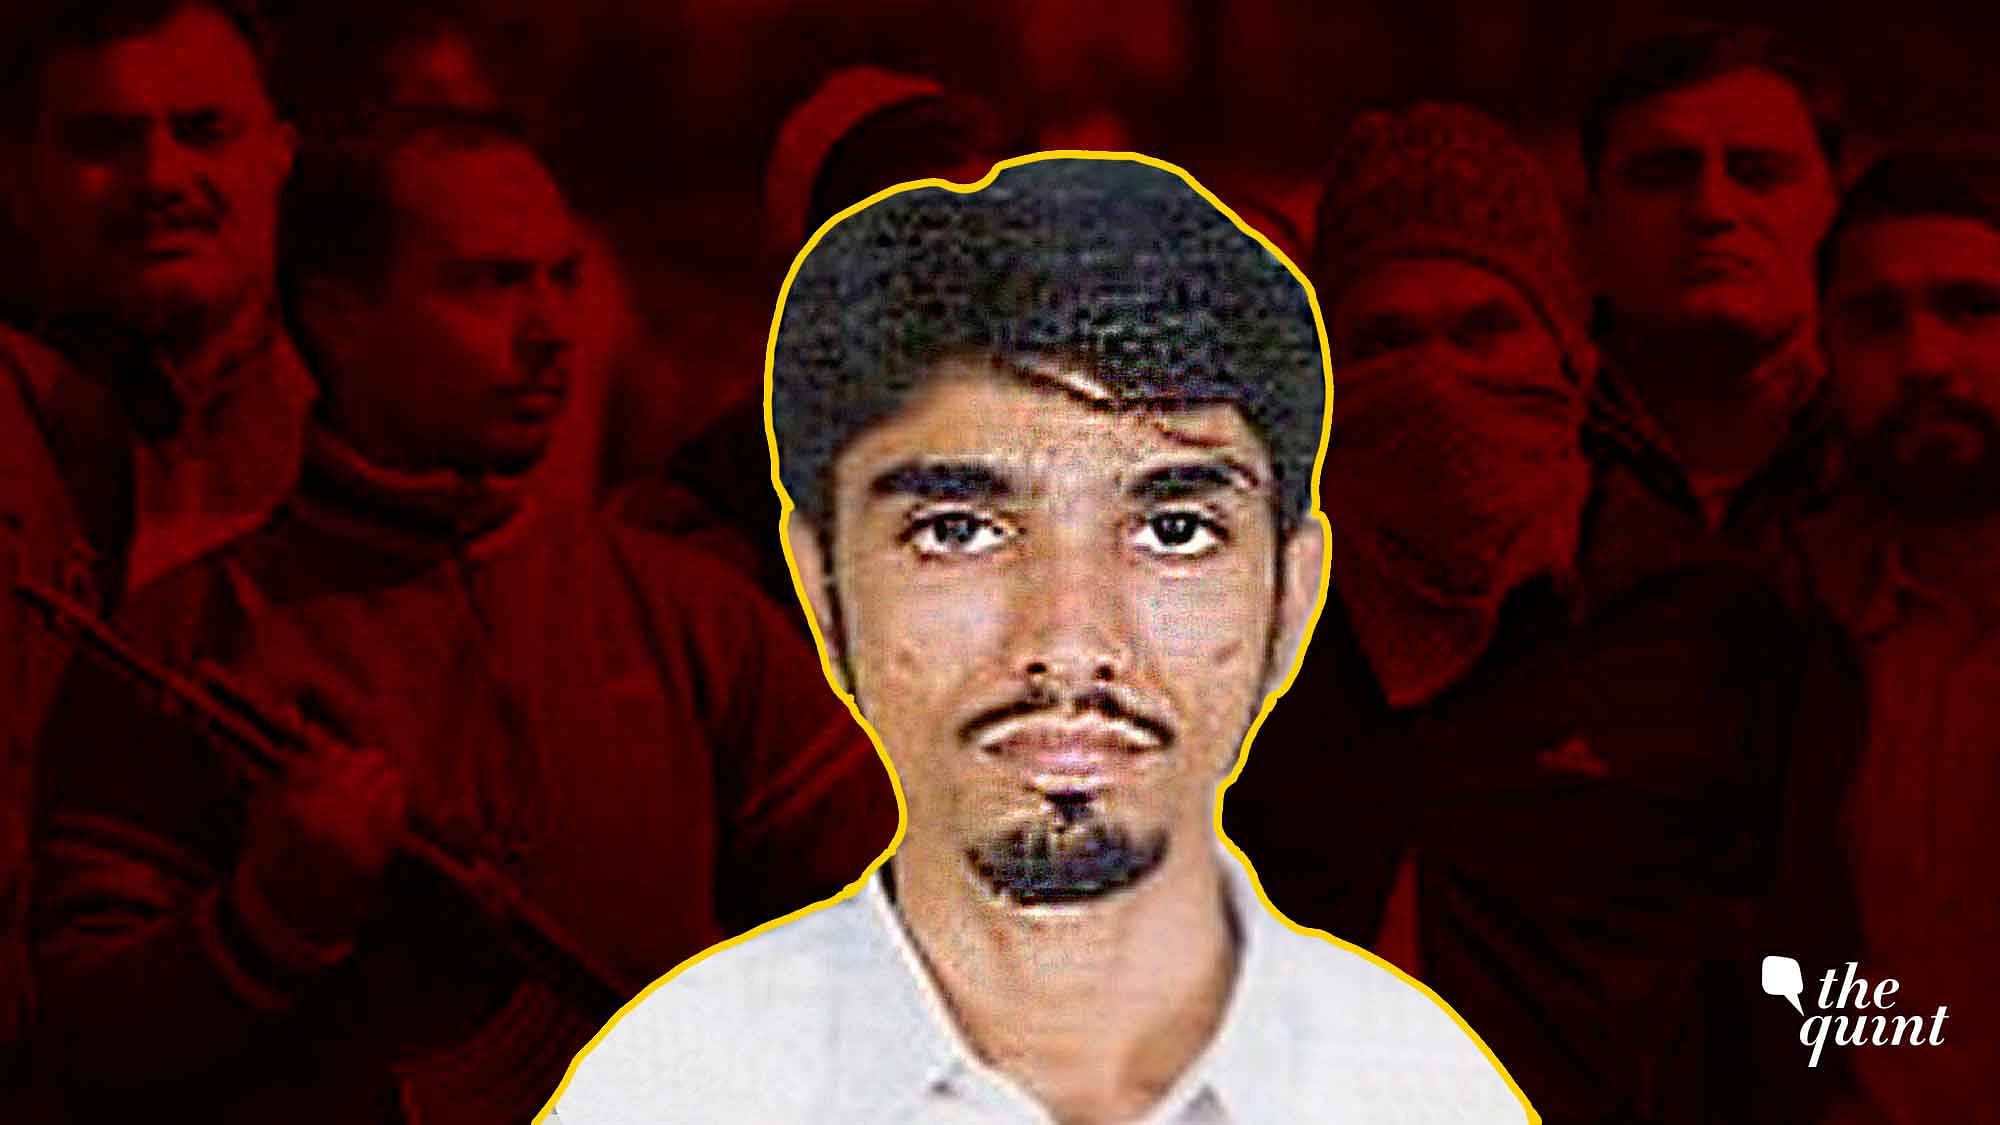  Indian Mujahideen’s top bomb maker, Abdul Subhan Qureshi alias Tauqeer was arrested by the Delhi police on 22 January 2018.&nbsp;